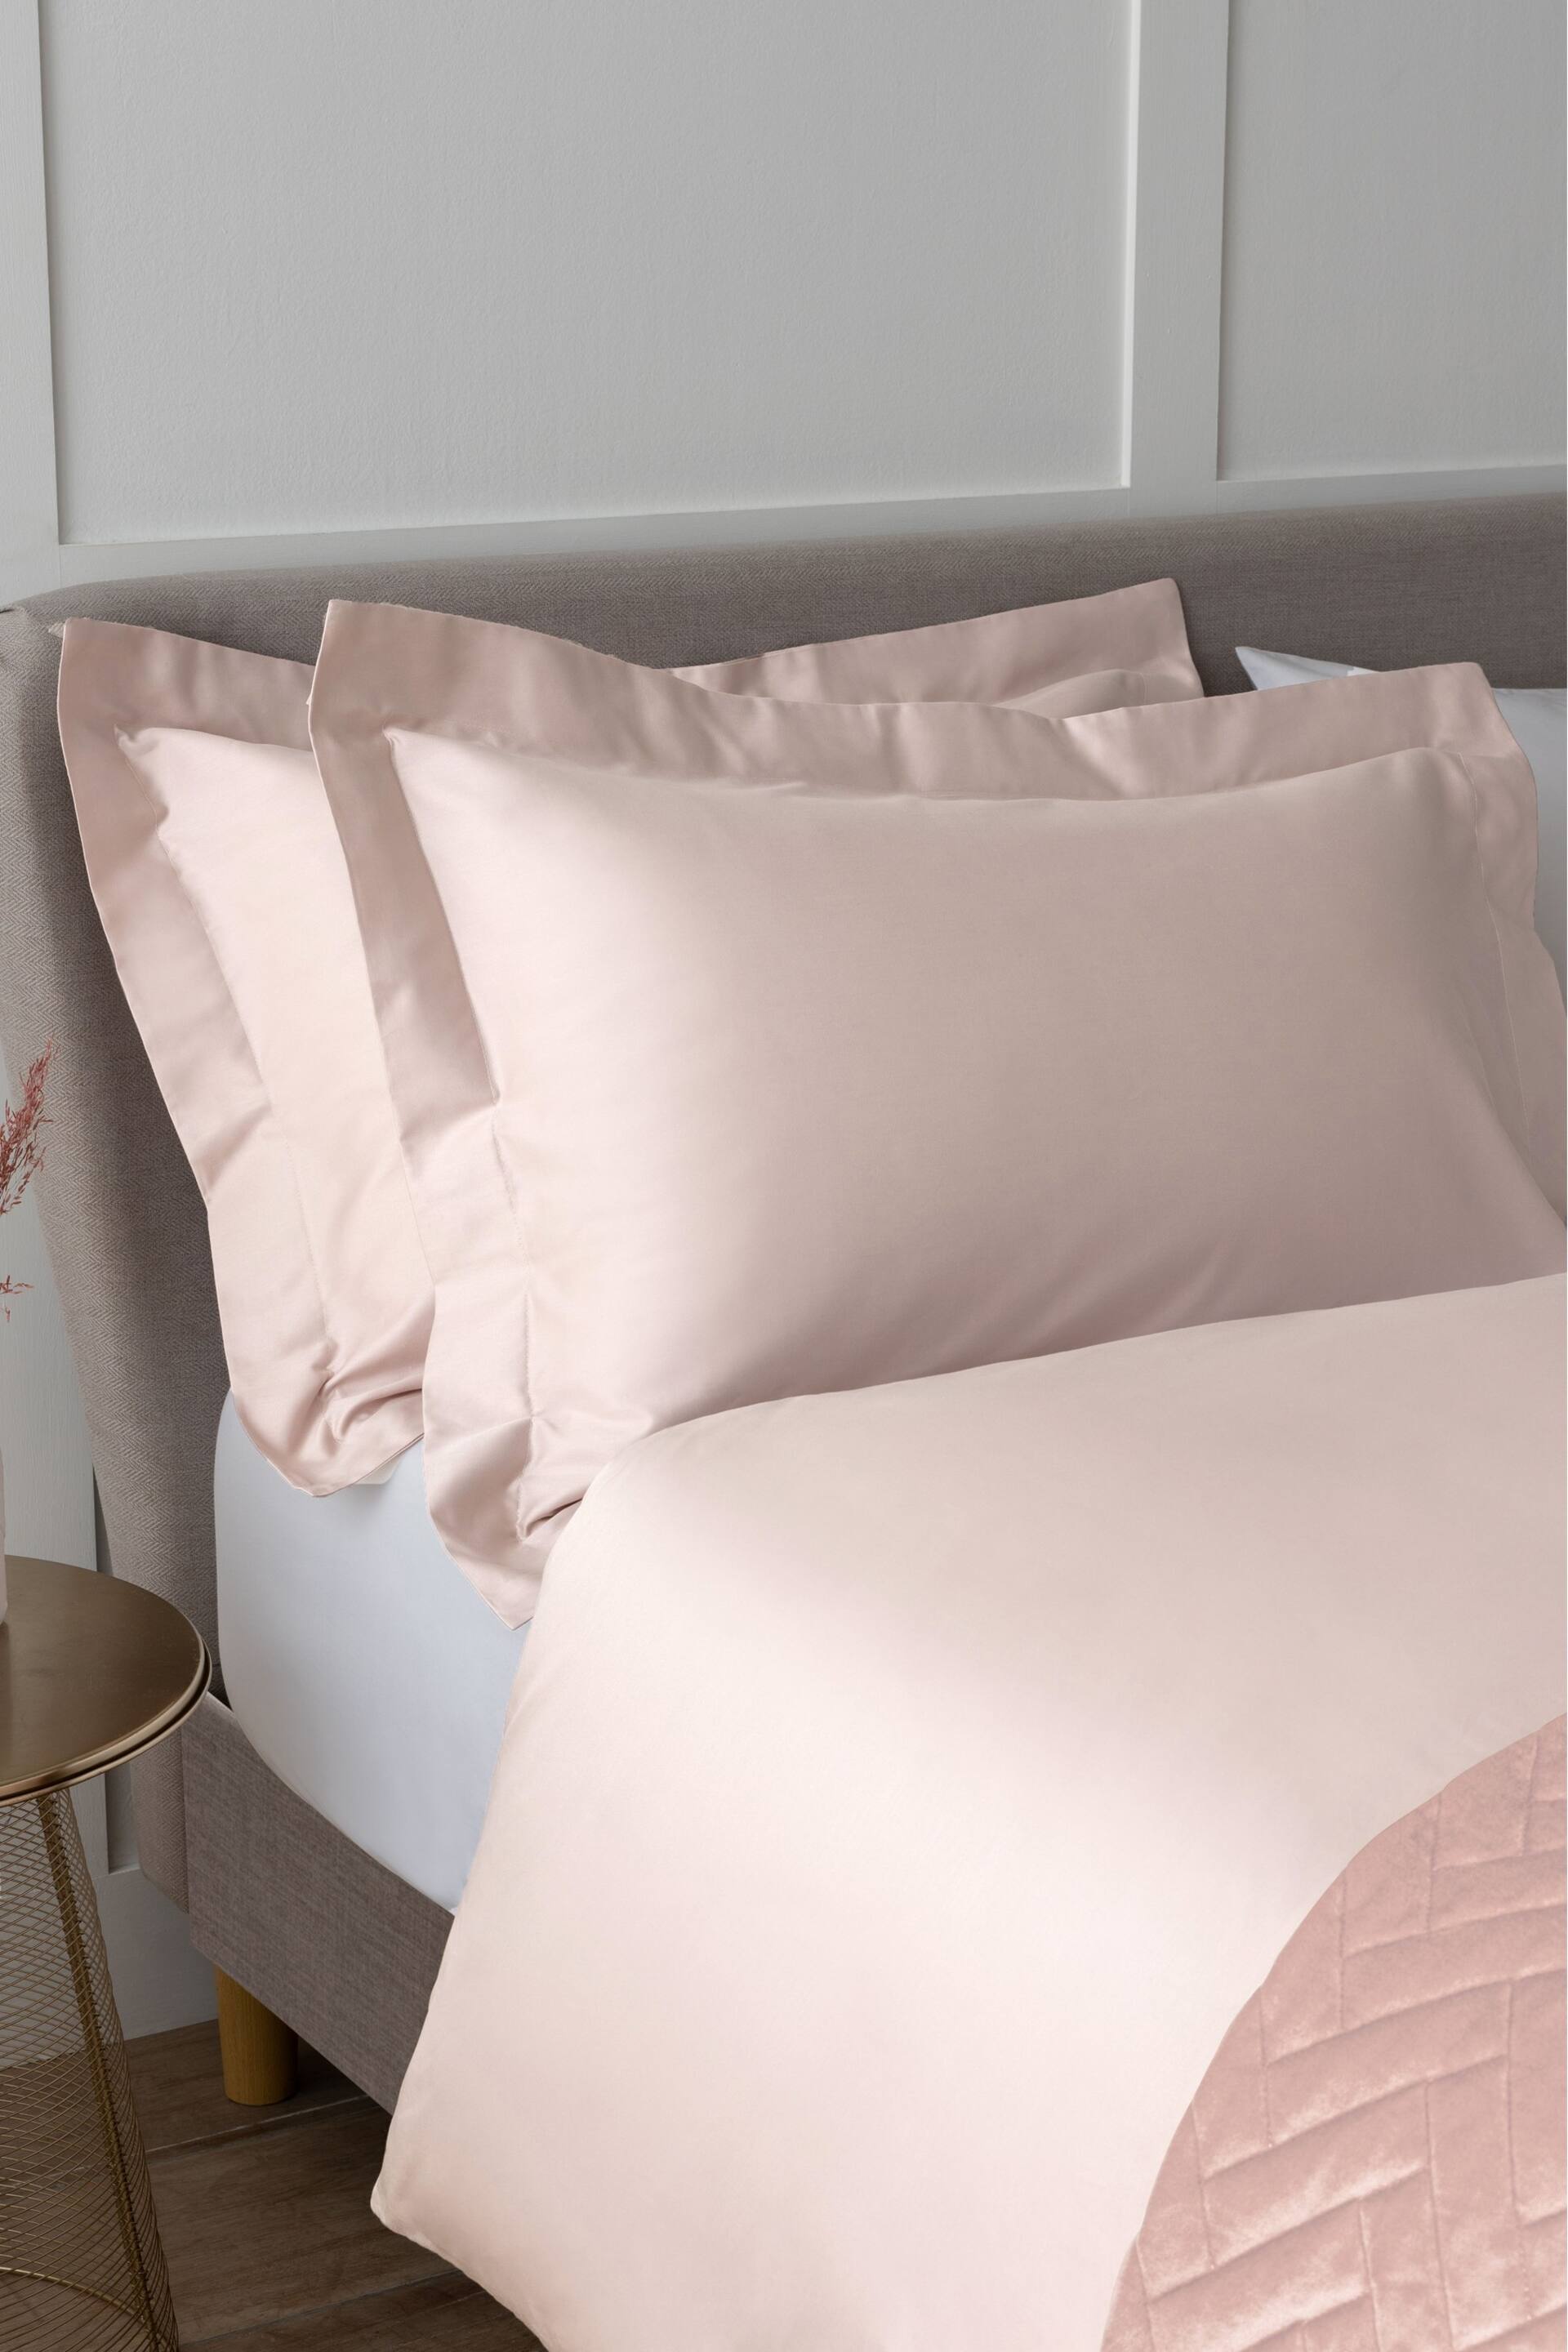 Set of 2 Blush Pink Collection Luxe 400 Thread Count 100% Egyptian Cotton Pillowcases - Image 1 of 3